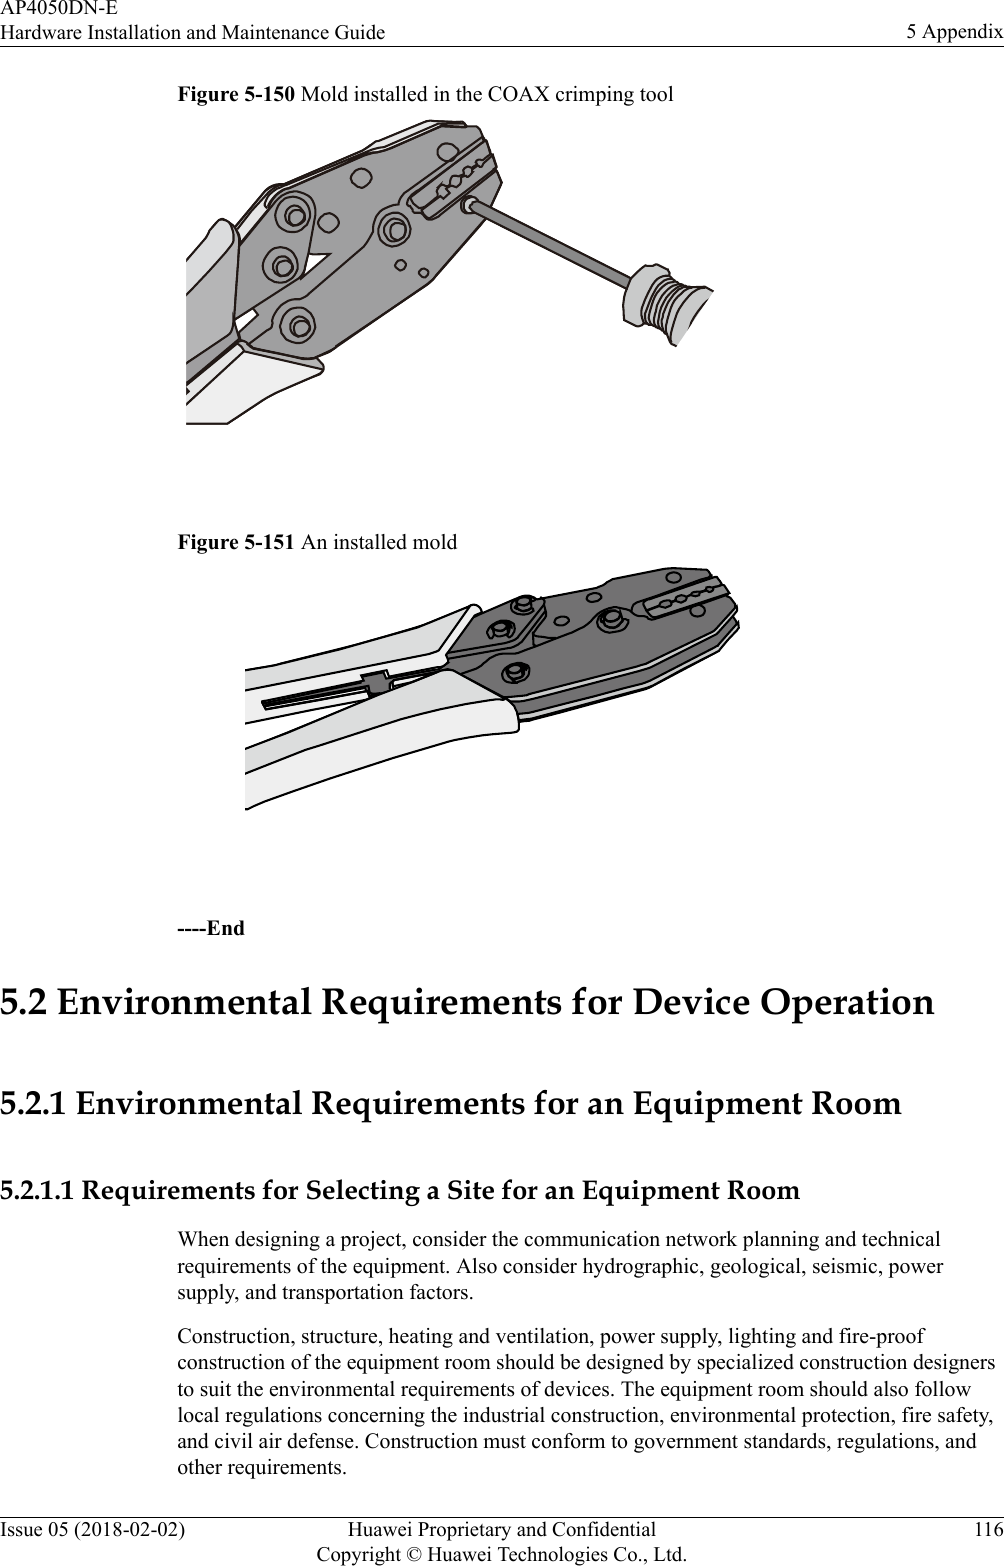 Figure 5-150 Mold installed in the COAX crimping tool Figure 5-151 An installed mold ----End5.2 Environmental Requirements for Device Operation5.2.1 Environmental Requirements for an Equipment Room5.2.1.1 Requirements for Selecting a Site for an Equipment RoomWhen designing a project, consider the communication network planning and technicalrequirements of the equipment. Also consider hydrographic, geological, seismic, powersupply, and transportation factors.Construction, structure, heating and ventilation, power supply, lighting and fire-proofconstruction of the equipment room should be designed by specialized construction designersto suit the environmental requirements of devices. The equipment room should also followlocal regulations concerning the industrial construction, environmental protection, fire safety,and civil air defense. Construction must conform to government standards, regulations, andother requirements.AP4050DN-EHardware Installation and Maintenance Guide 5 AppendixIssue 05 (2018-02-02) Huawei Proprietary and ConfidentialCopyright © Huawei Technologies Co., Ltd.116